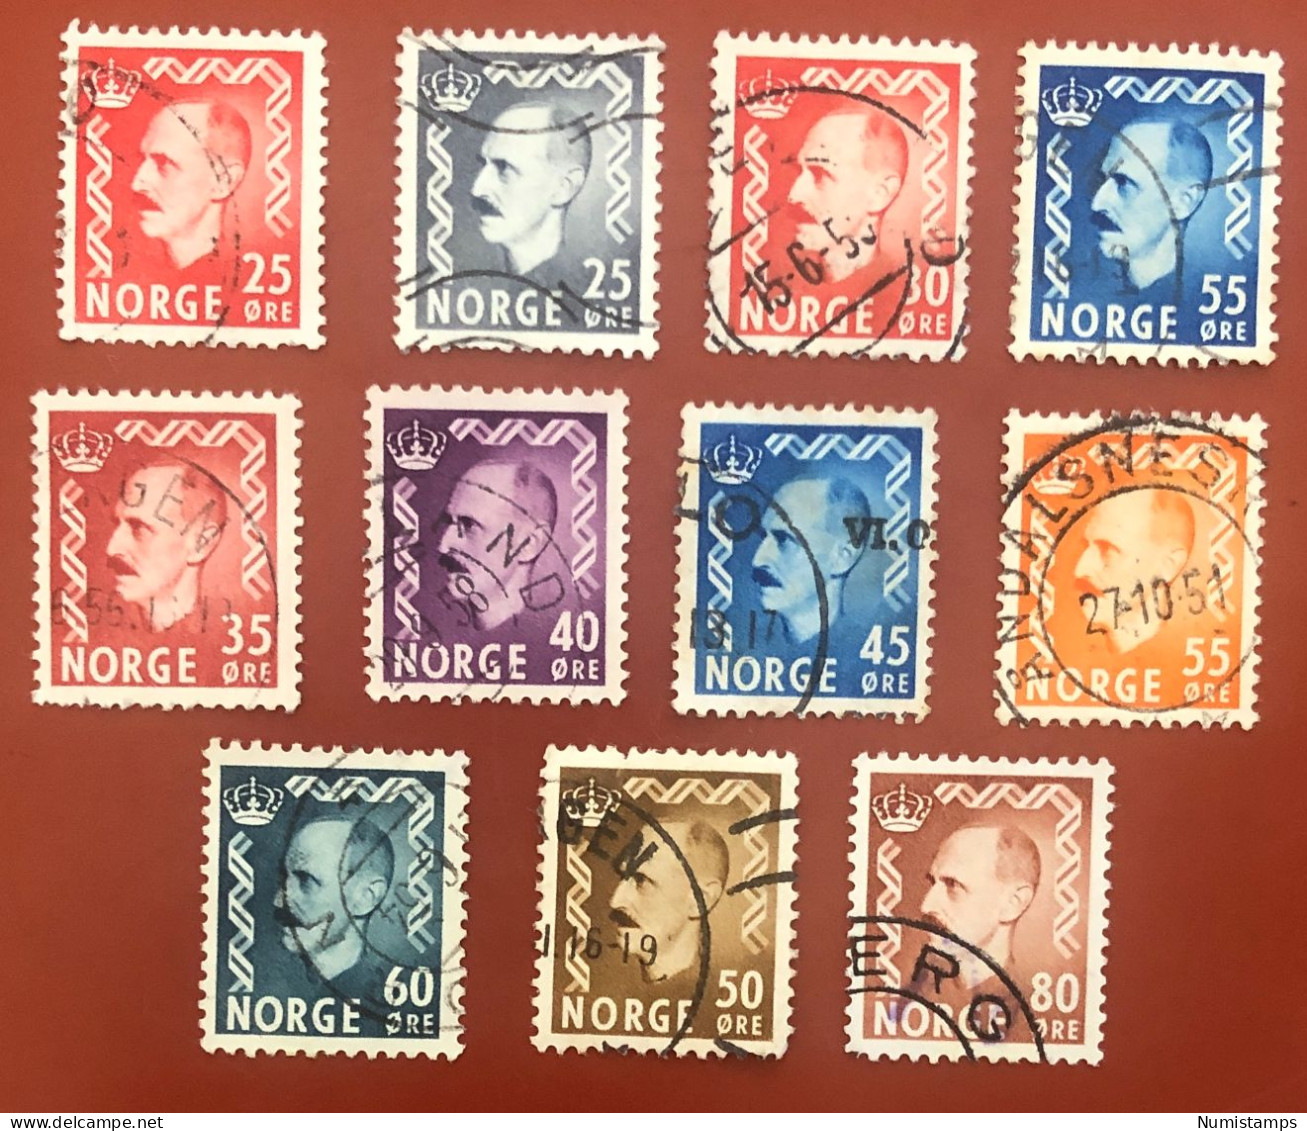 Norway - King Haakon VII (Series) From 1950 - Used Stamps